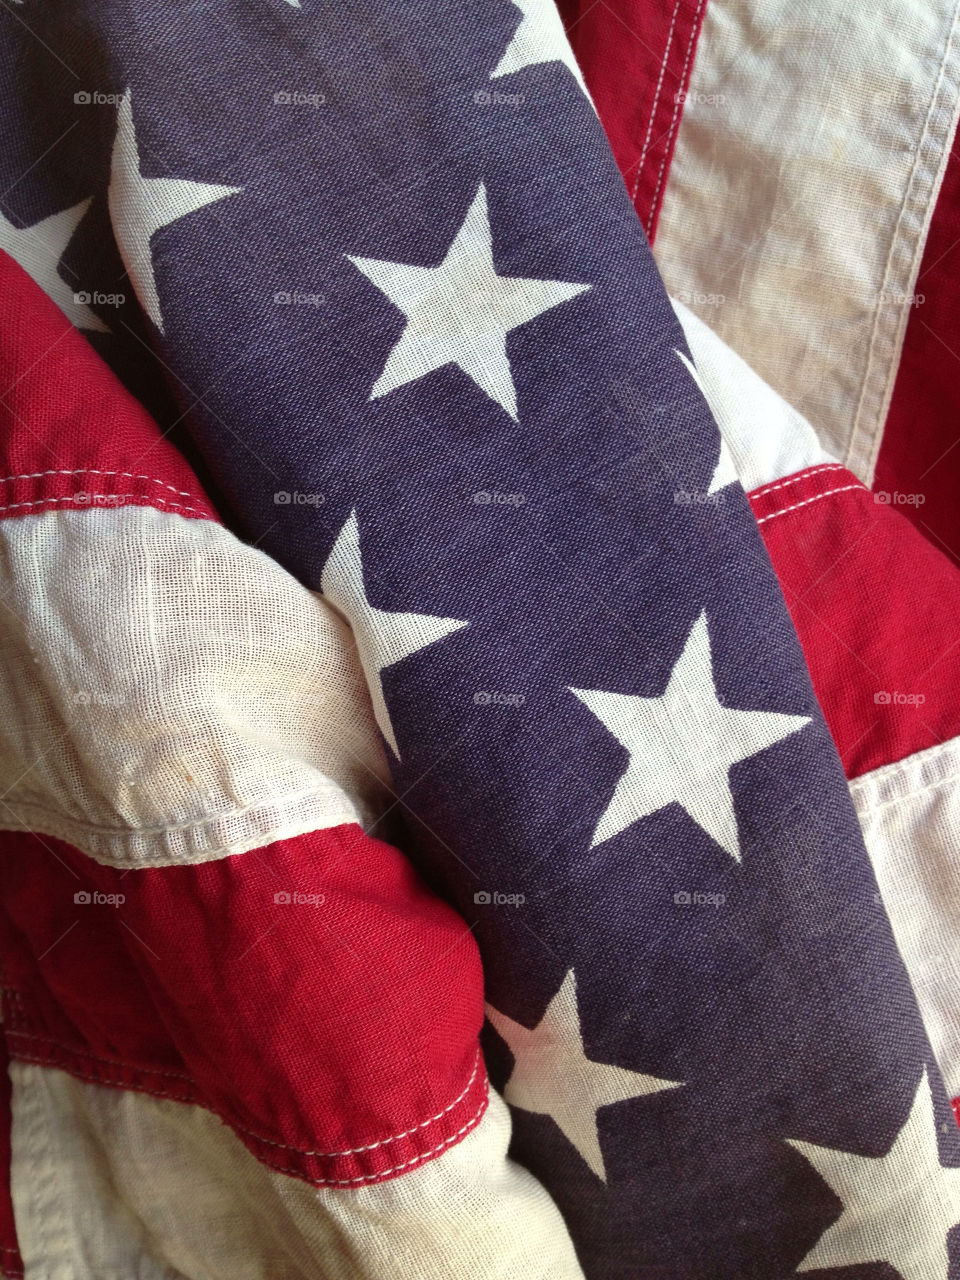 Detail of old American flag